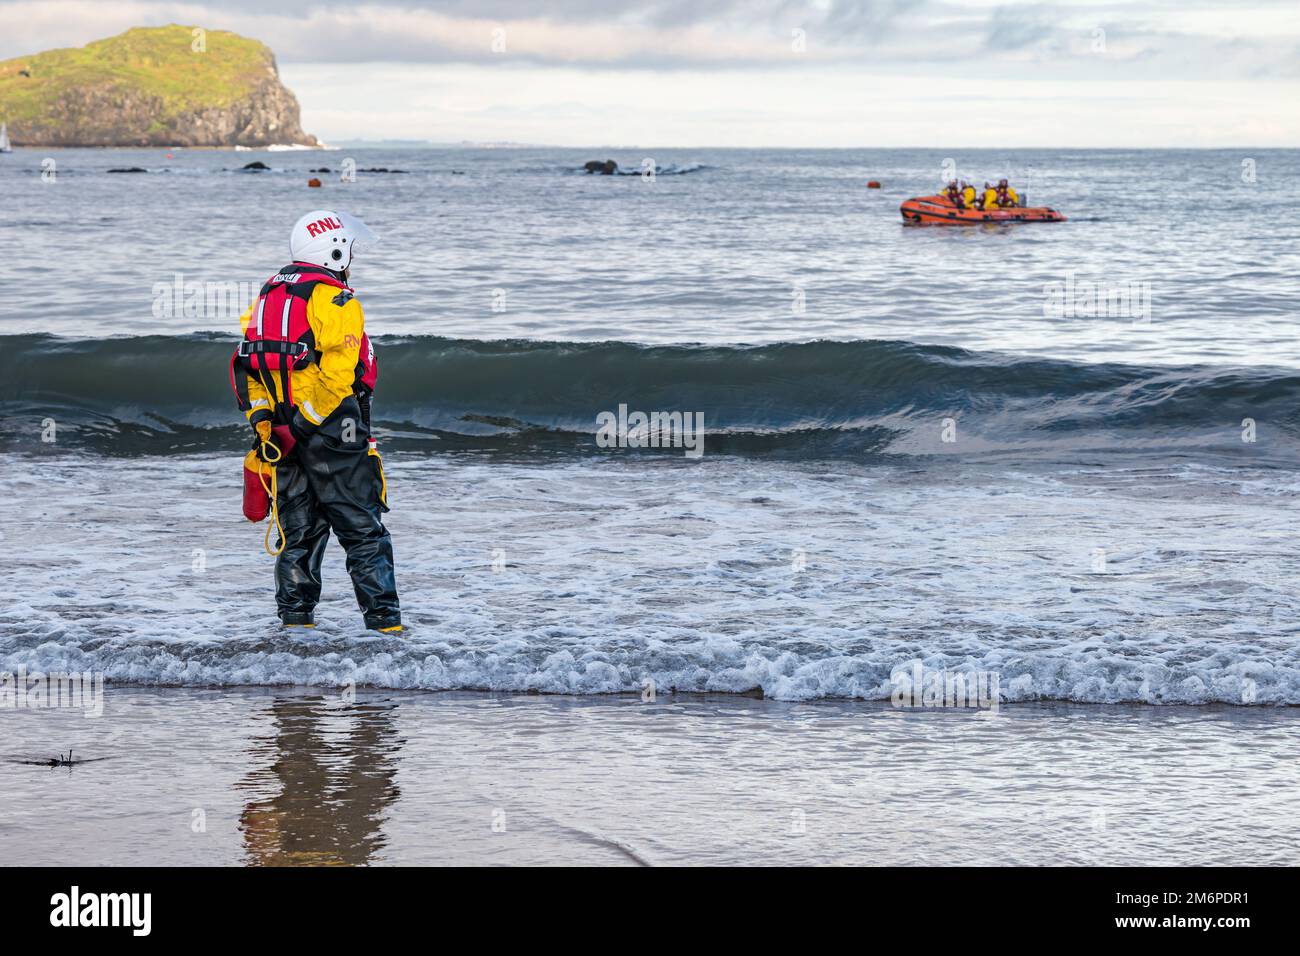 Royal National Lifeboat Institution (RNLI) inflatable boat and crew member on beach, Firth of Forth, North Berwick, East Lothian, Scotland, UK Stock Photo